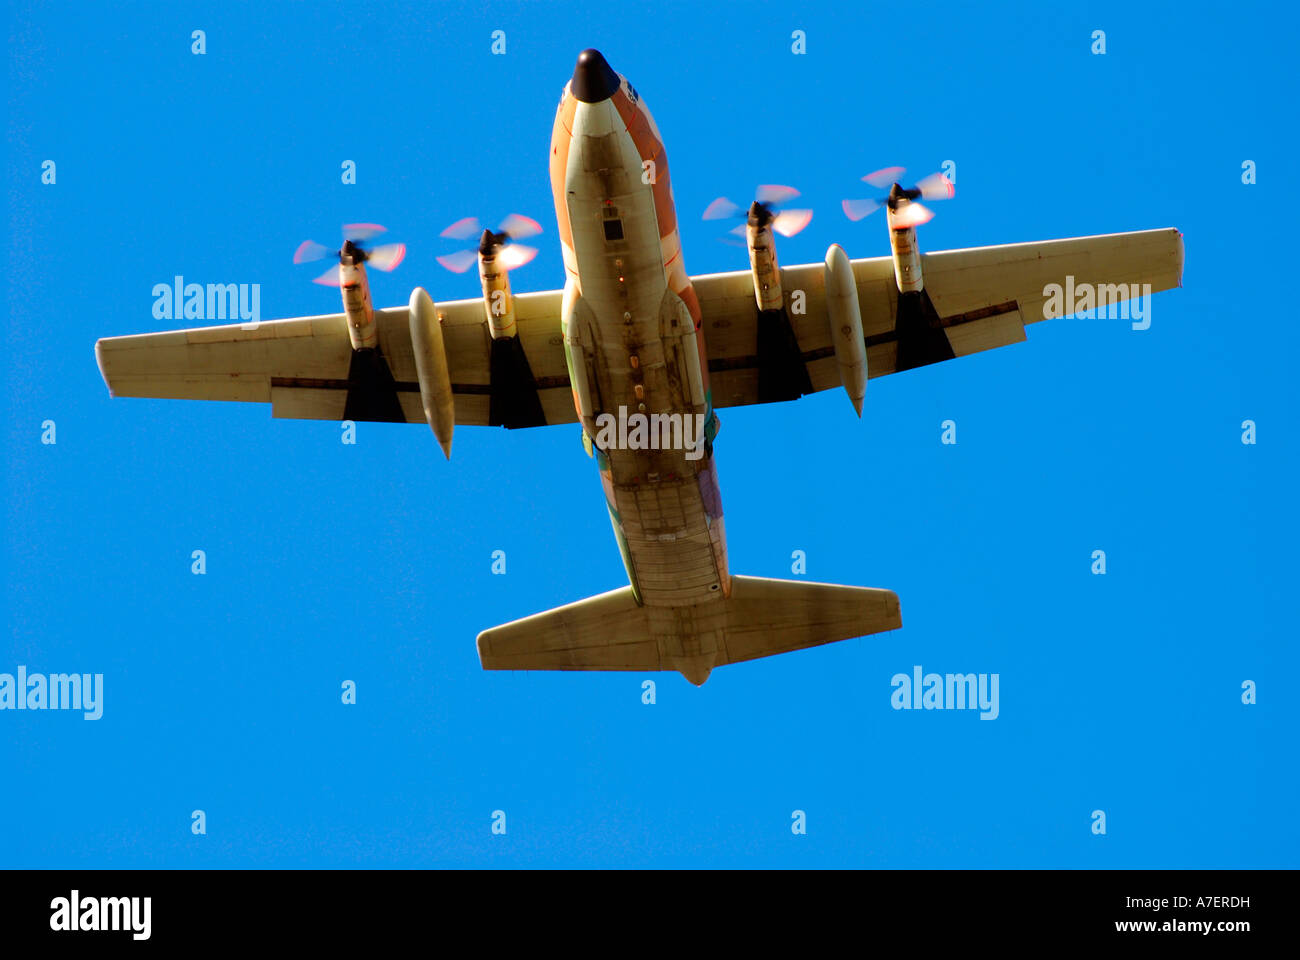 White propellor plane on blue sky background coming in to land Stock Photo